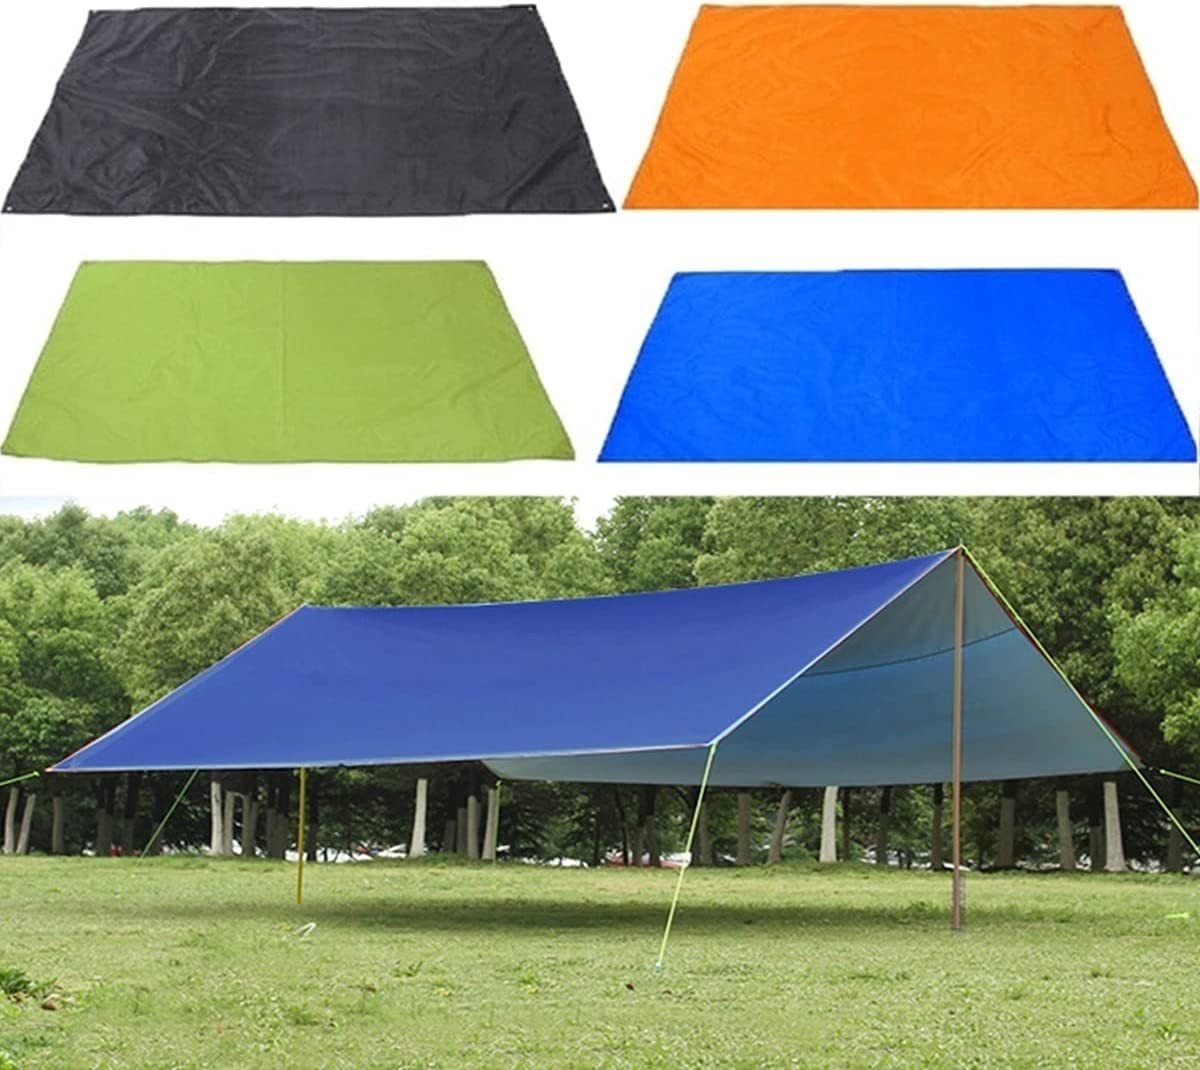 Primary image for Camping Tarp, Waterproof Picnic Mat, Tent Footprint with Drawstring, Blue